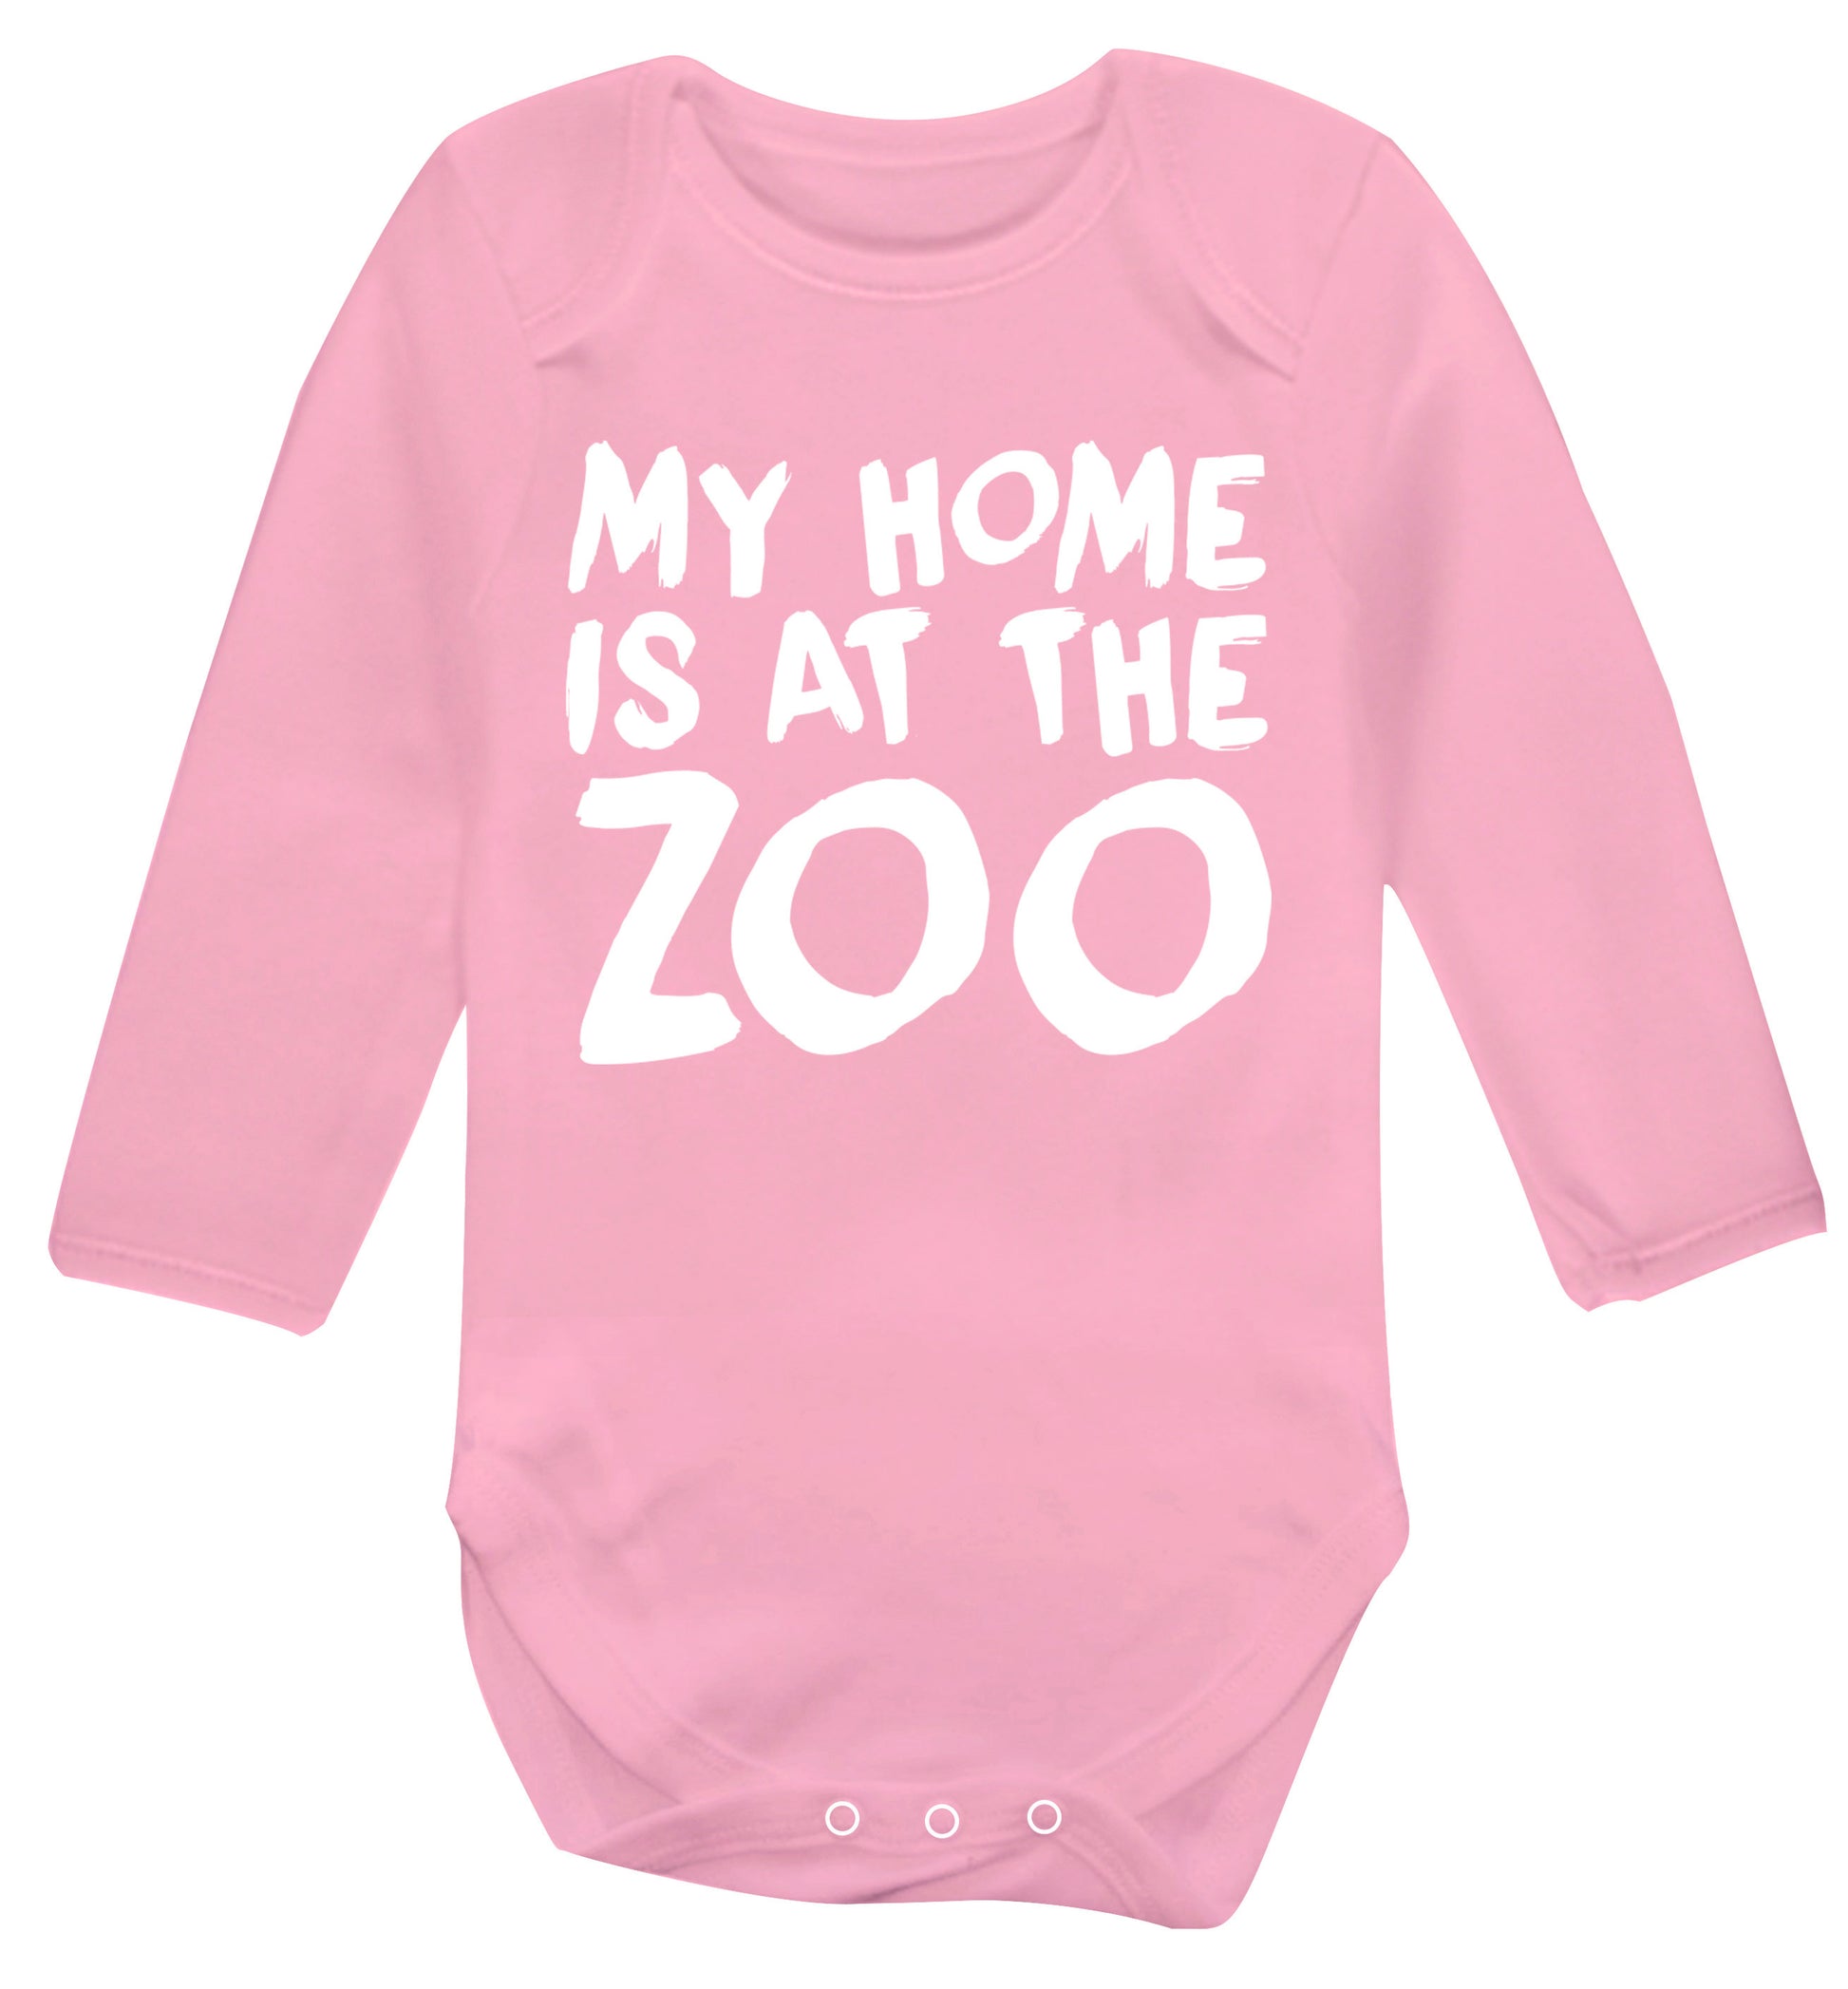 My home is at the zoo Baby Vest long sleeved pale pink 6-12 months